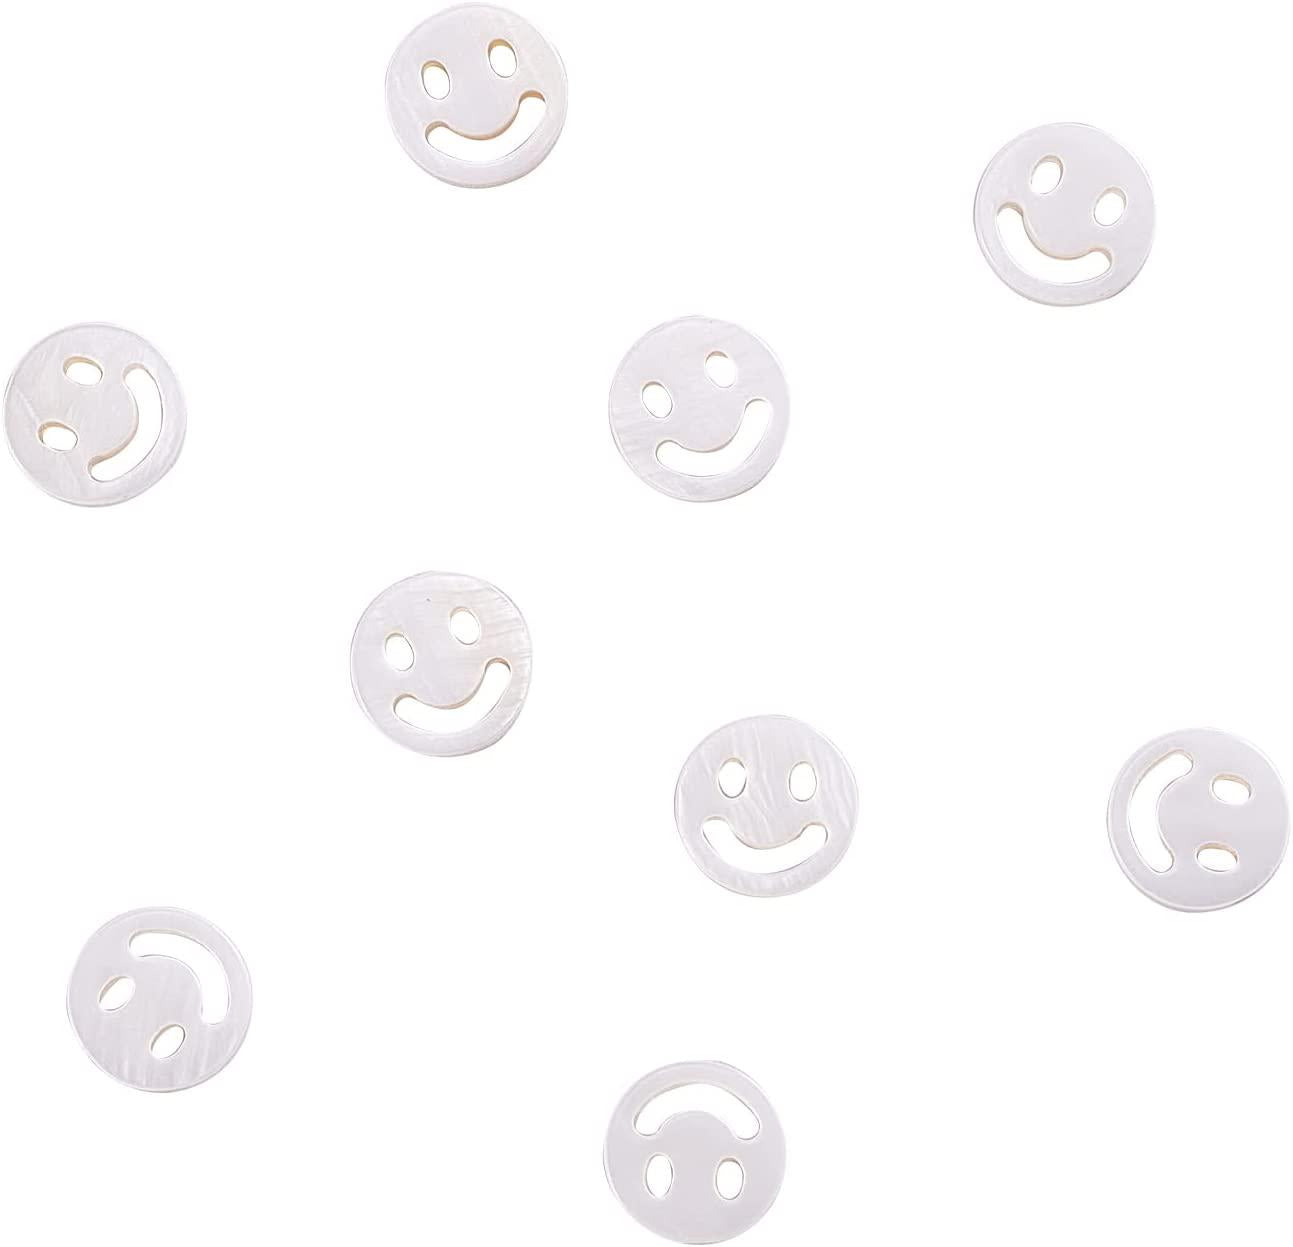 LiQunSweet, LiQunSweet 10 Pcs Natural Freshwater Shell Cute Cartoon Smiling Happy Face Beads Flat Round Loose Spacer Beads for DIY Making Jewelry or Crafts Supplies